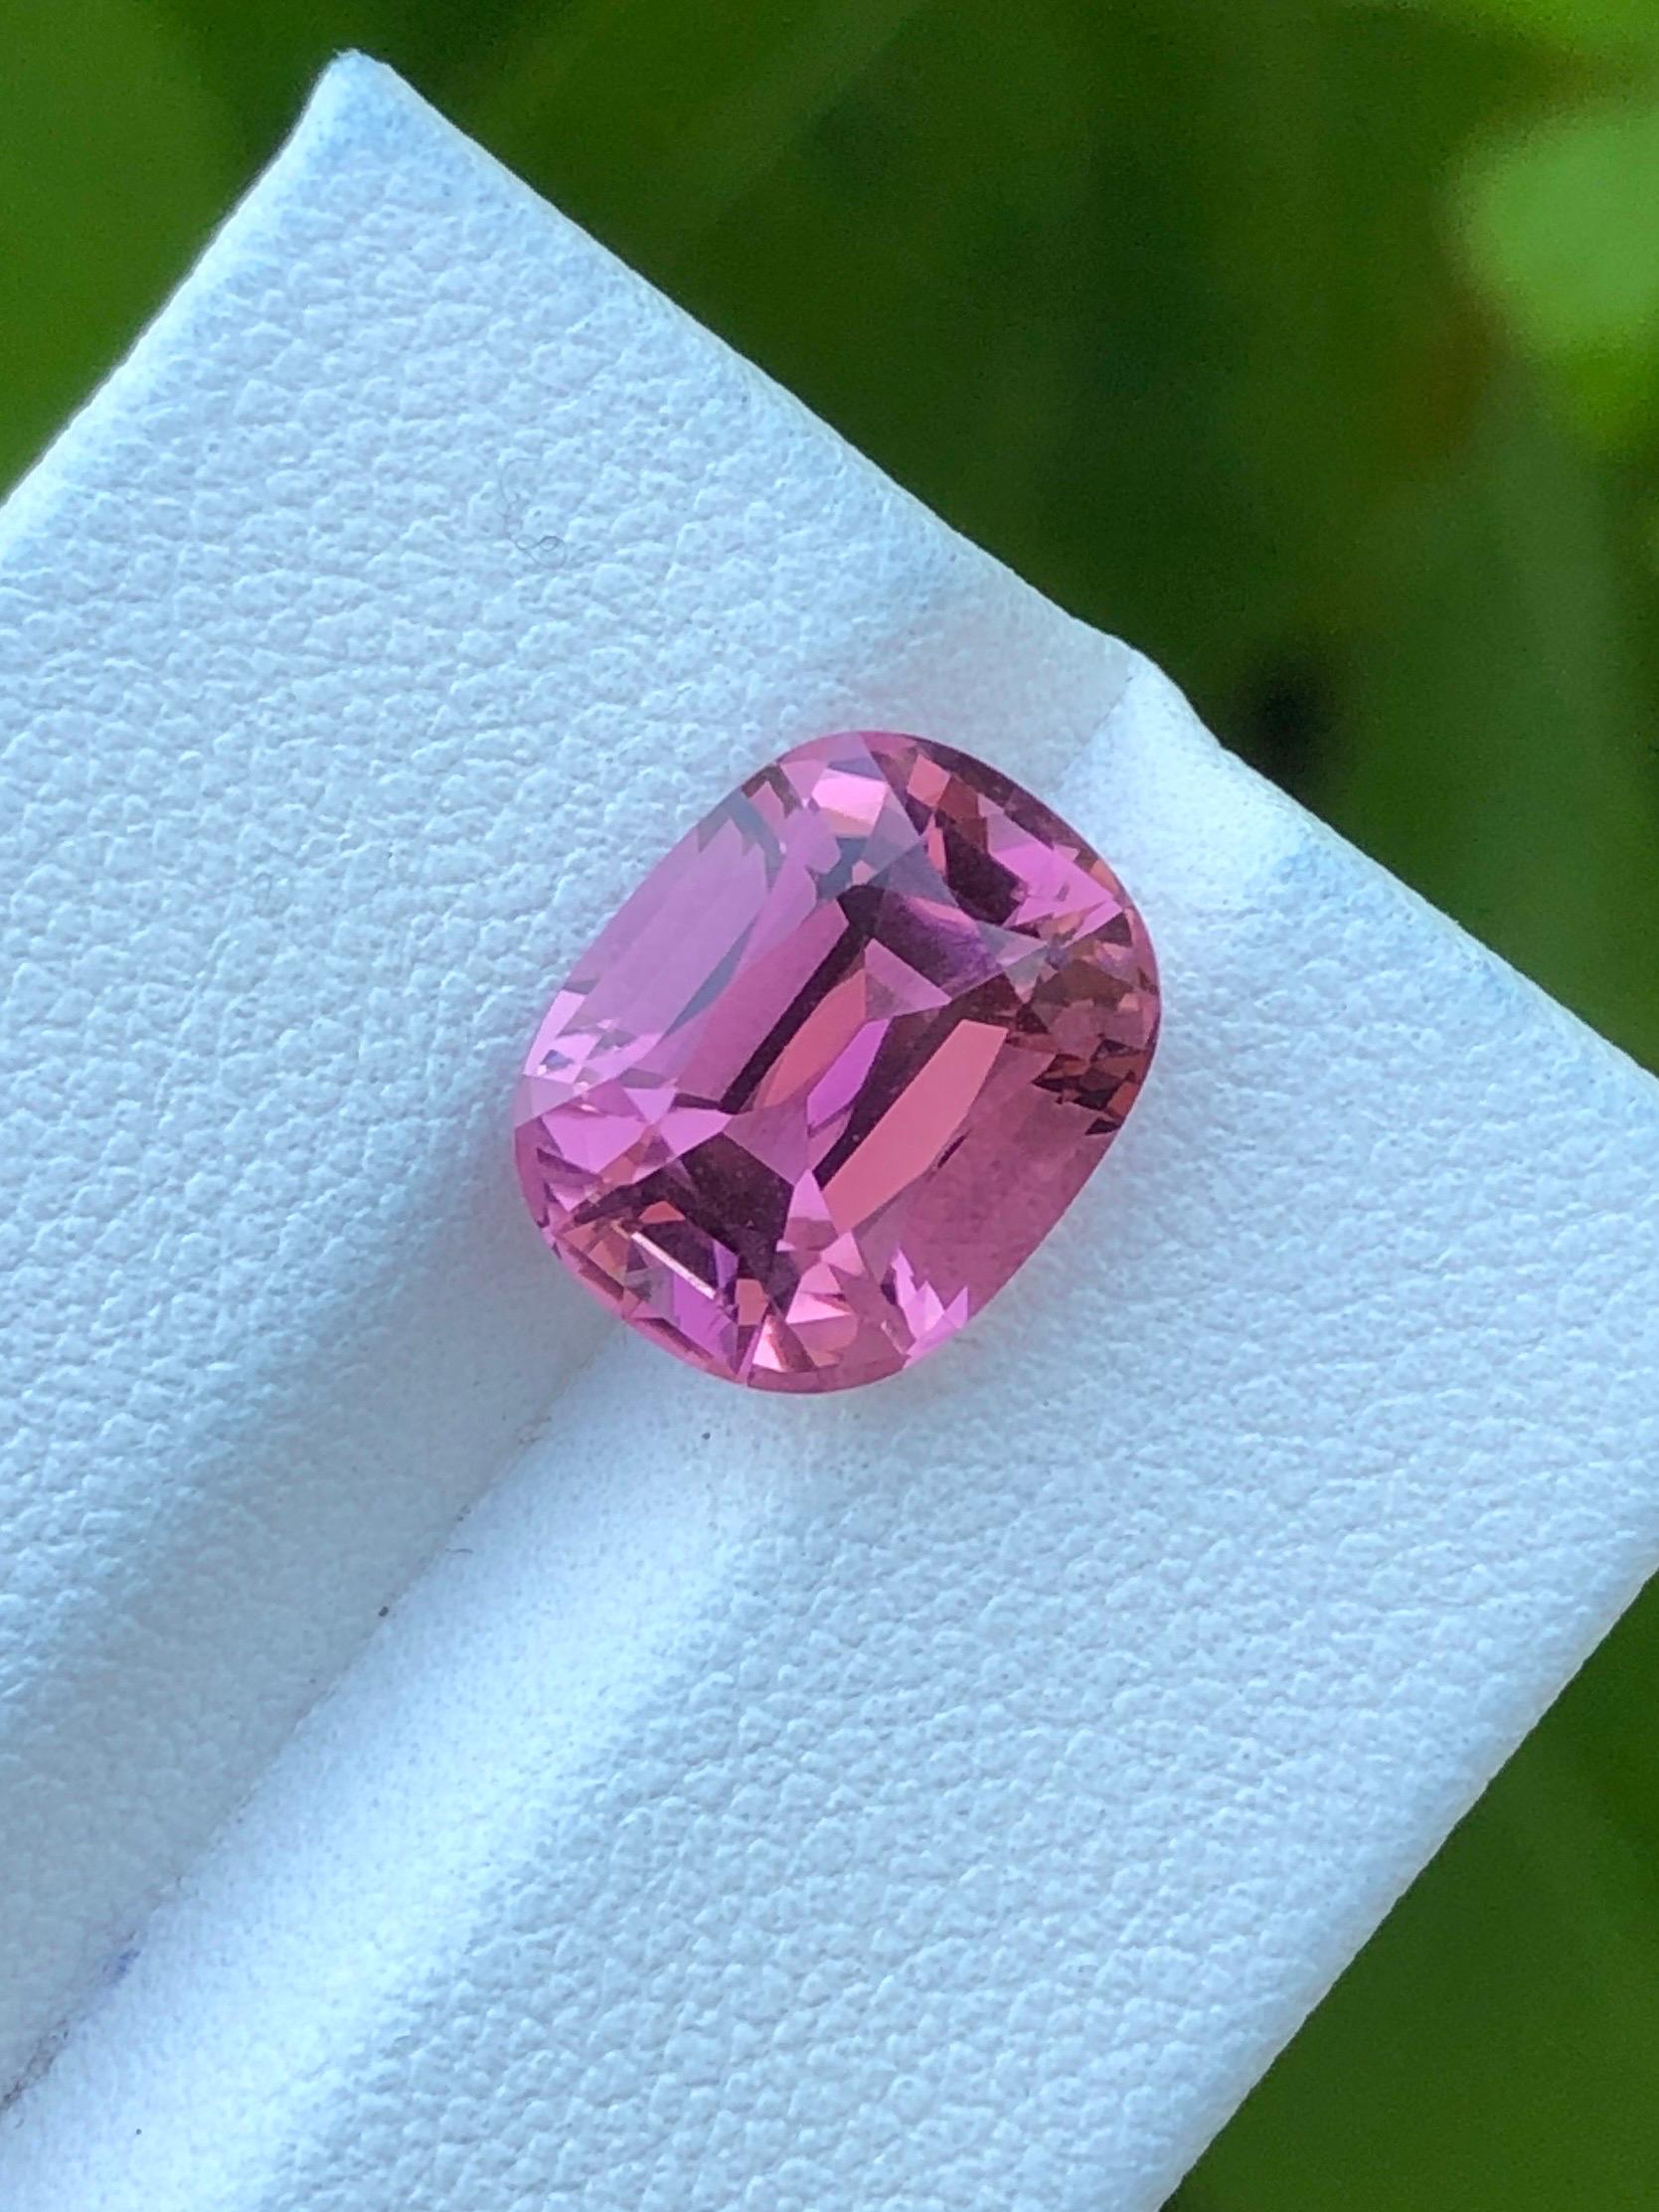 Introducing a stunning 4.55 ct Pink Tourmaline from Afghanistan. This exquisite gem embodies rare beauty and elegance. Limited availability, so seize the opportunity to own this captivating piece of nature’s art. 💖 #Gemstone #PinkTourmaline